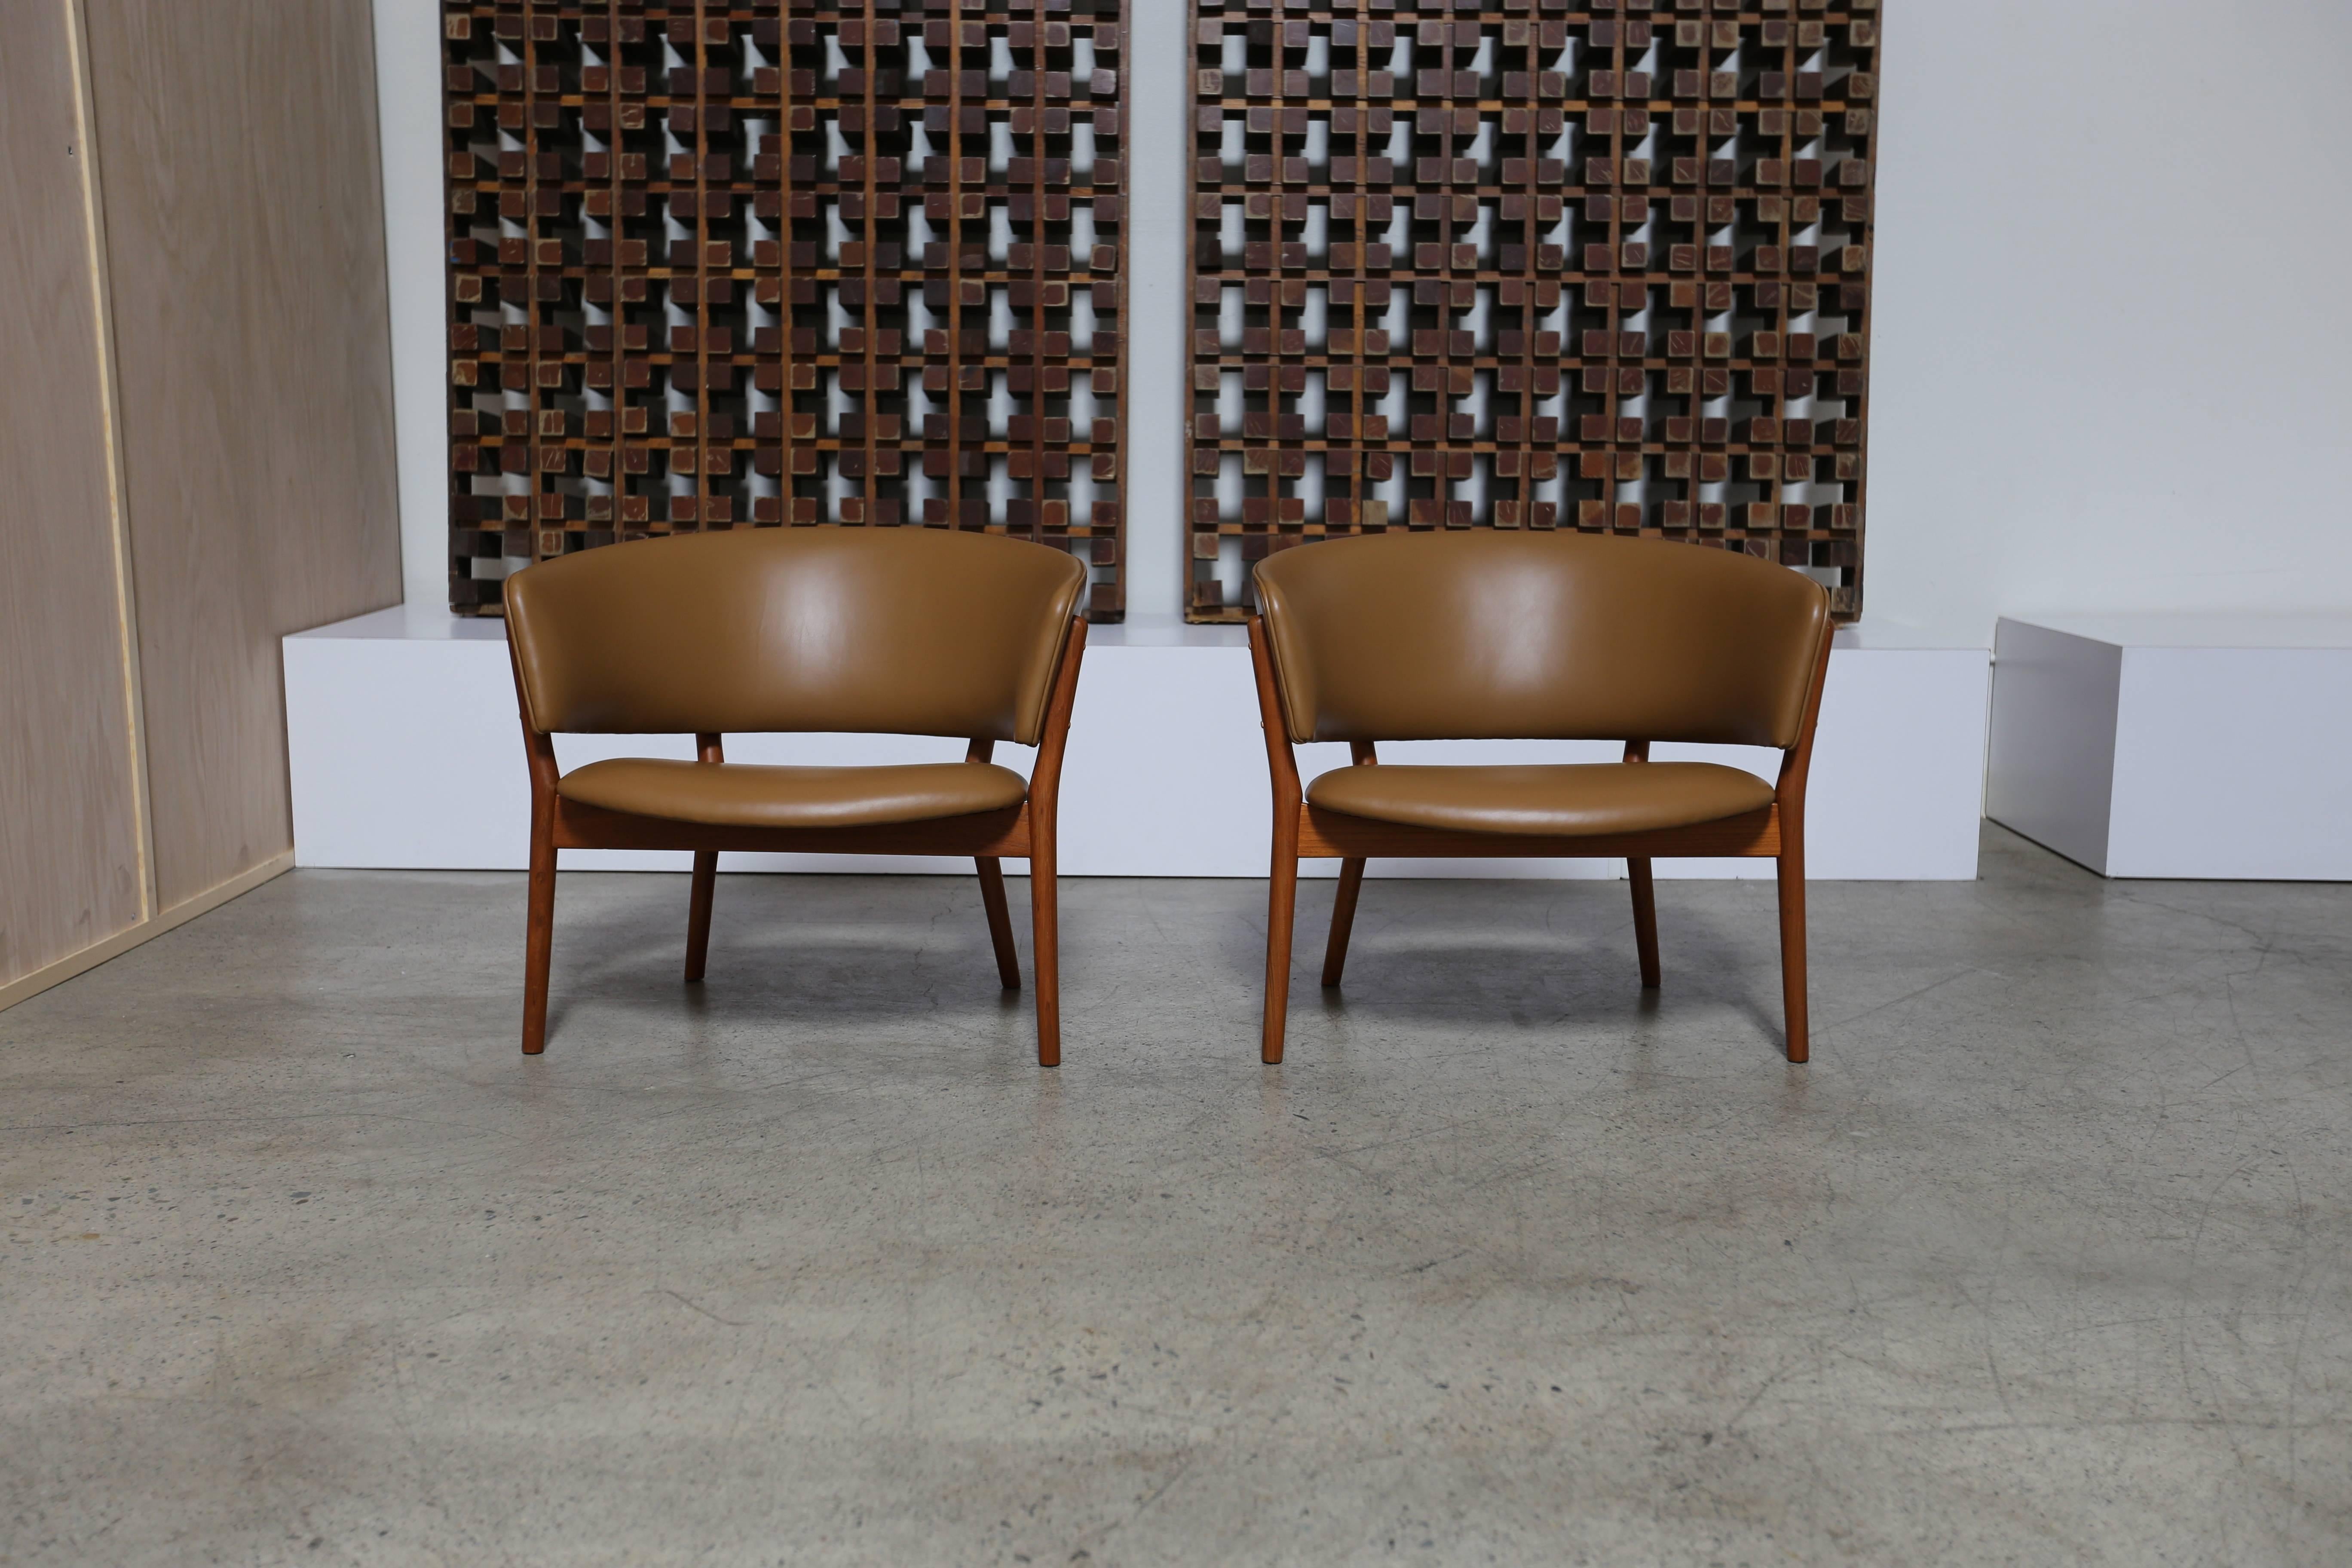 Pair of Leather and Teak Lounge Chairs by Nanna & Jorgen Ditzel 2